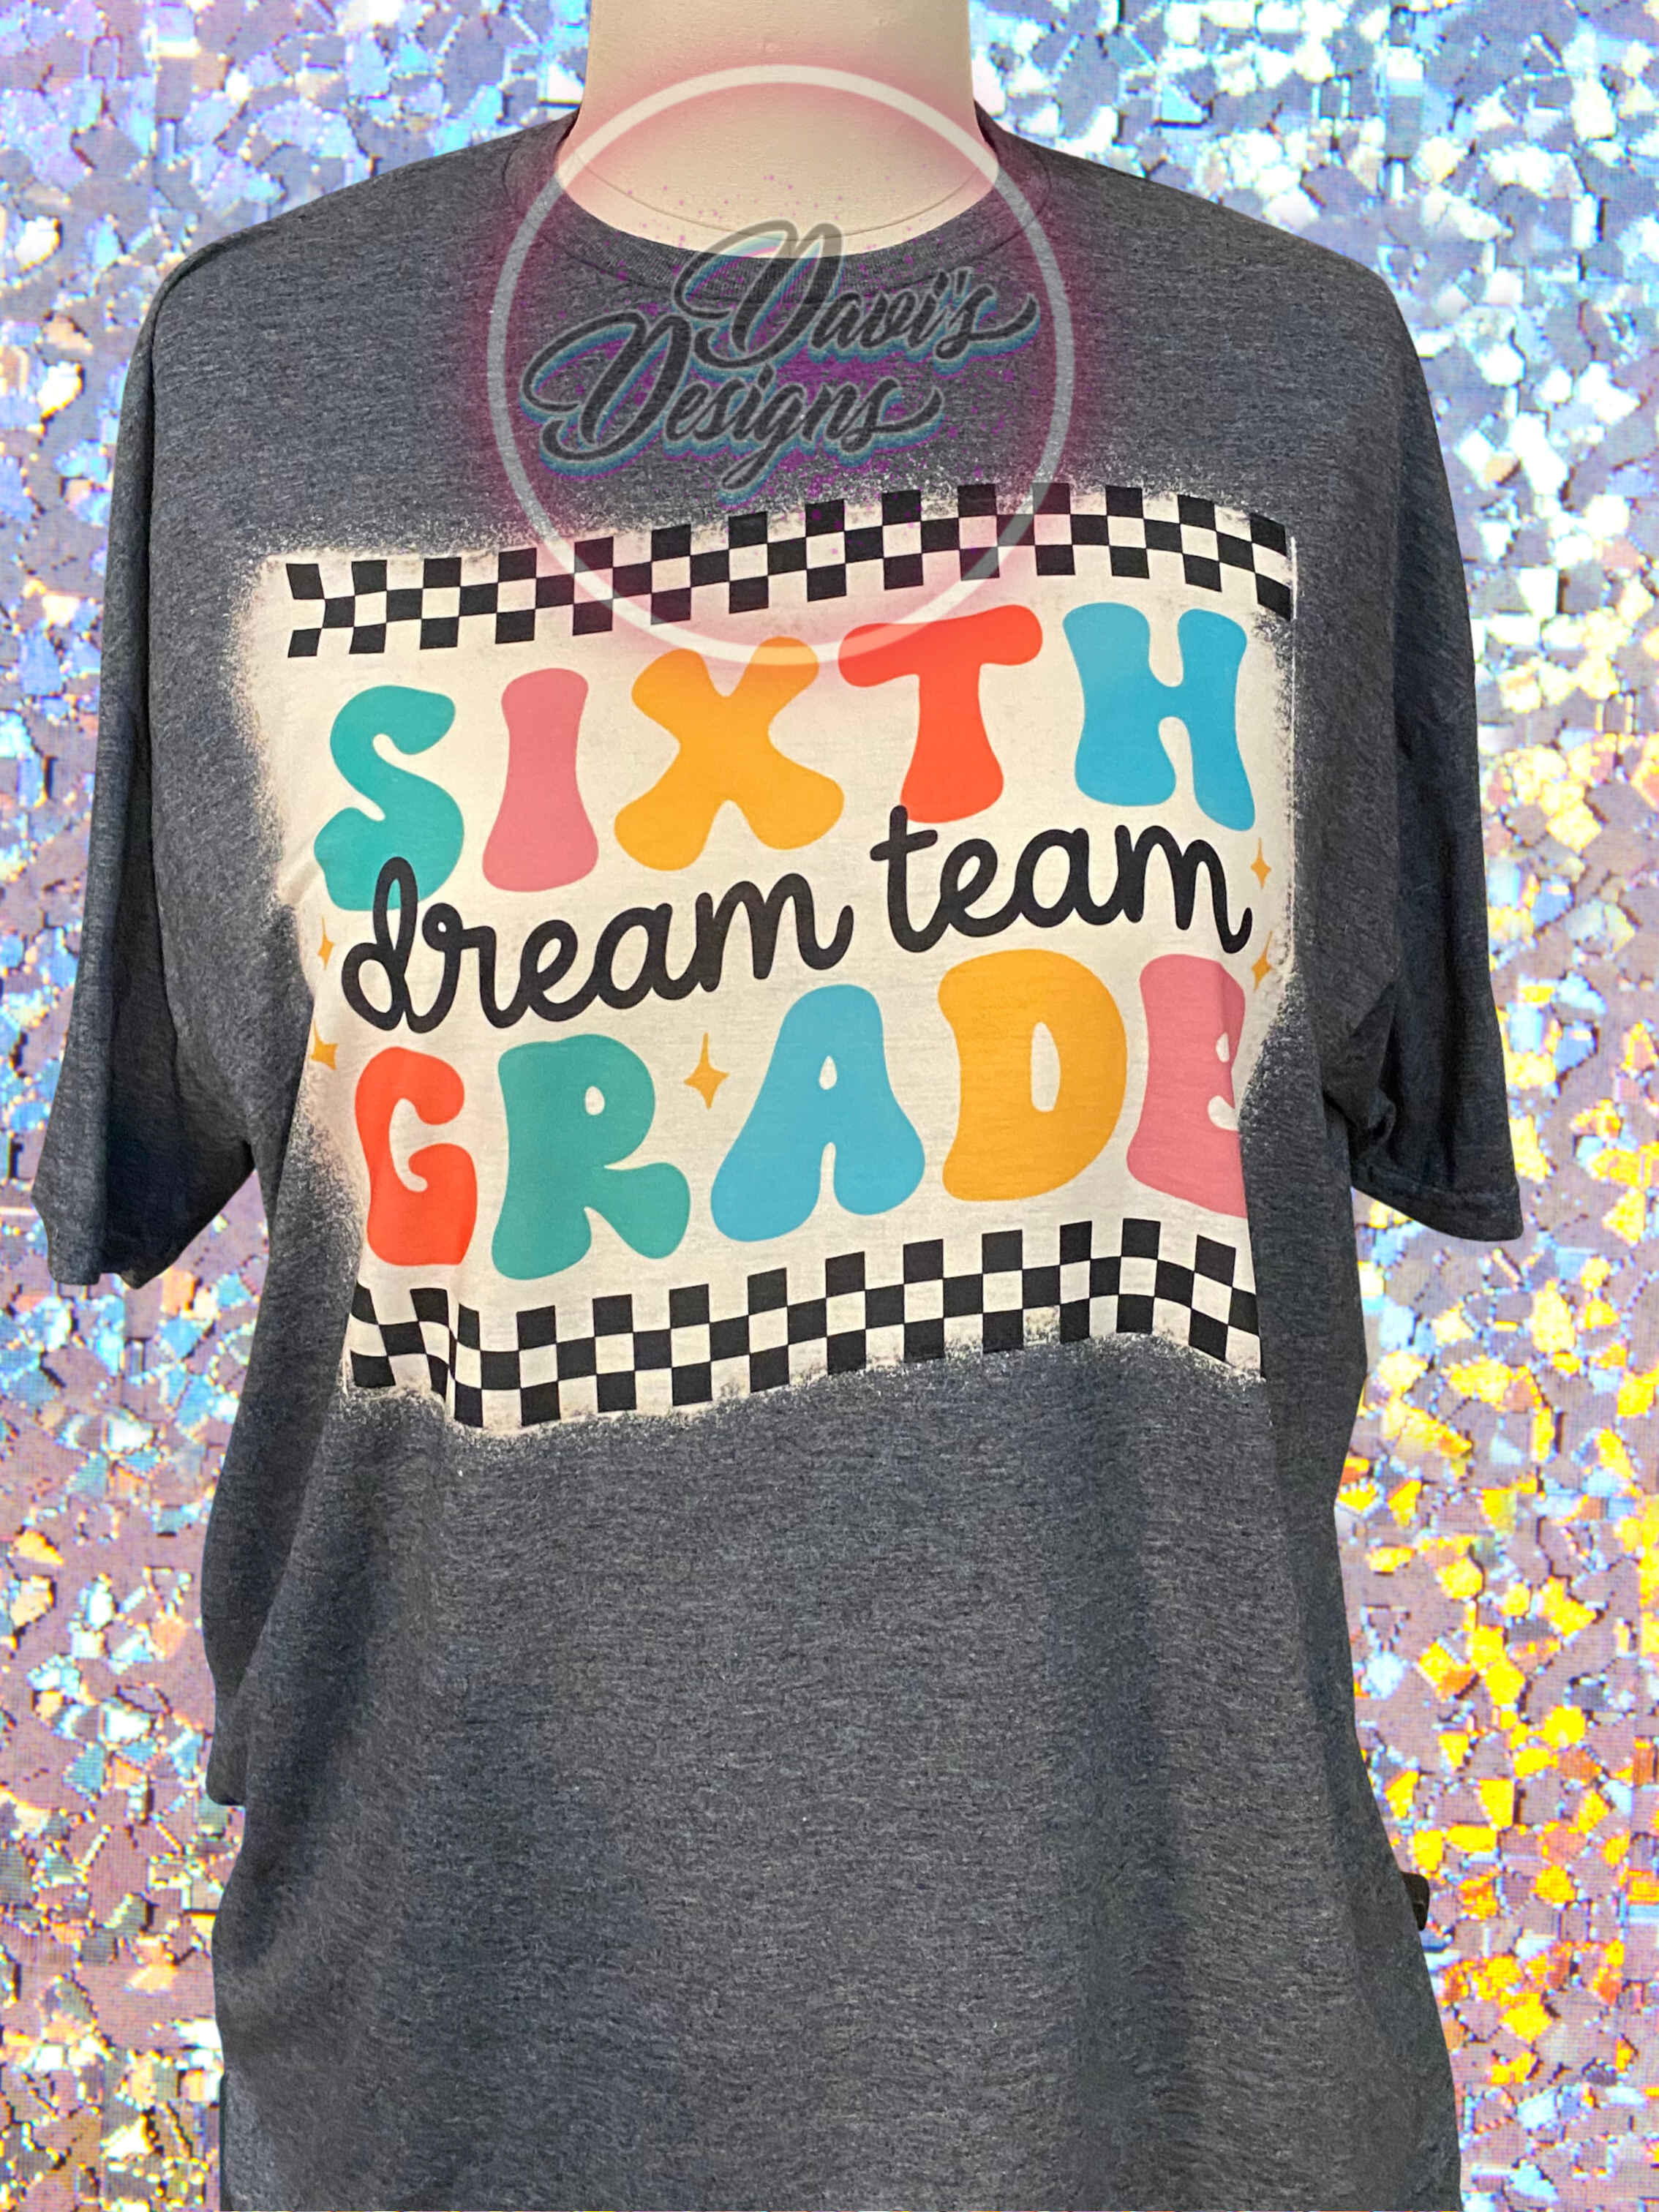 Dark Heather bleach patterned tee with quote Sixth Grade Dream Team on a racing flag.